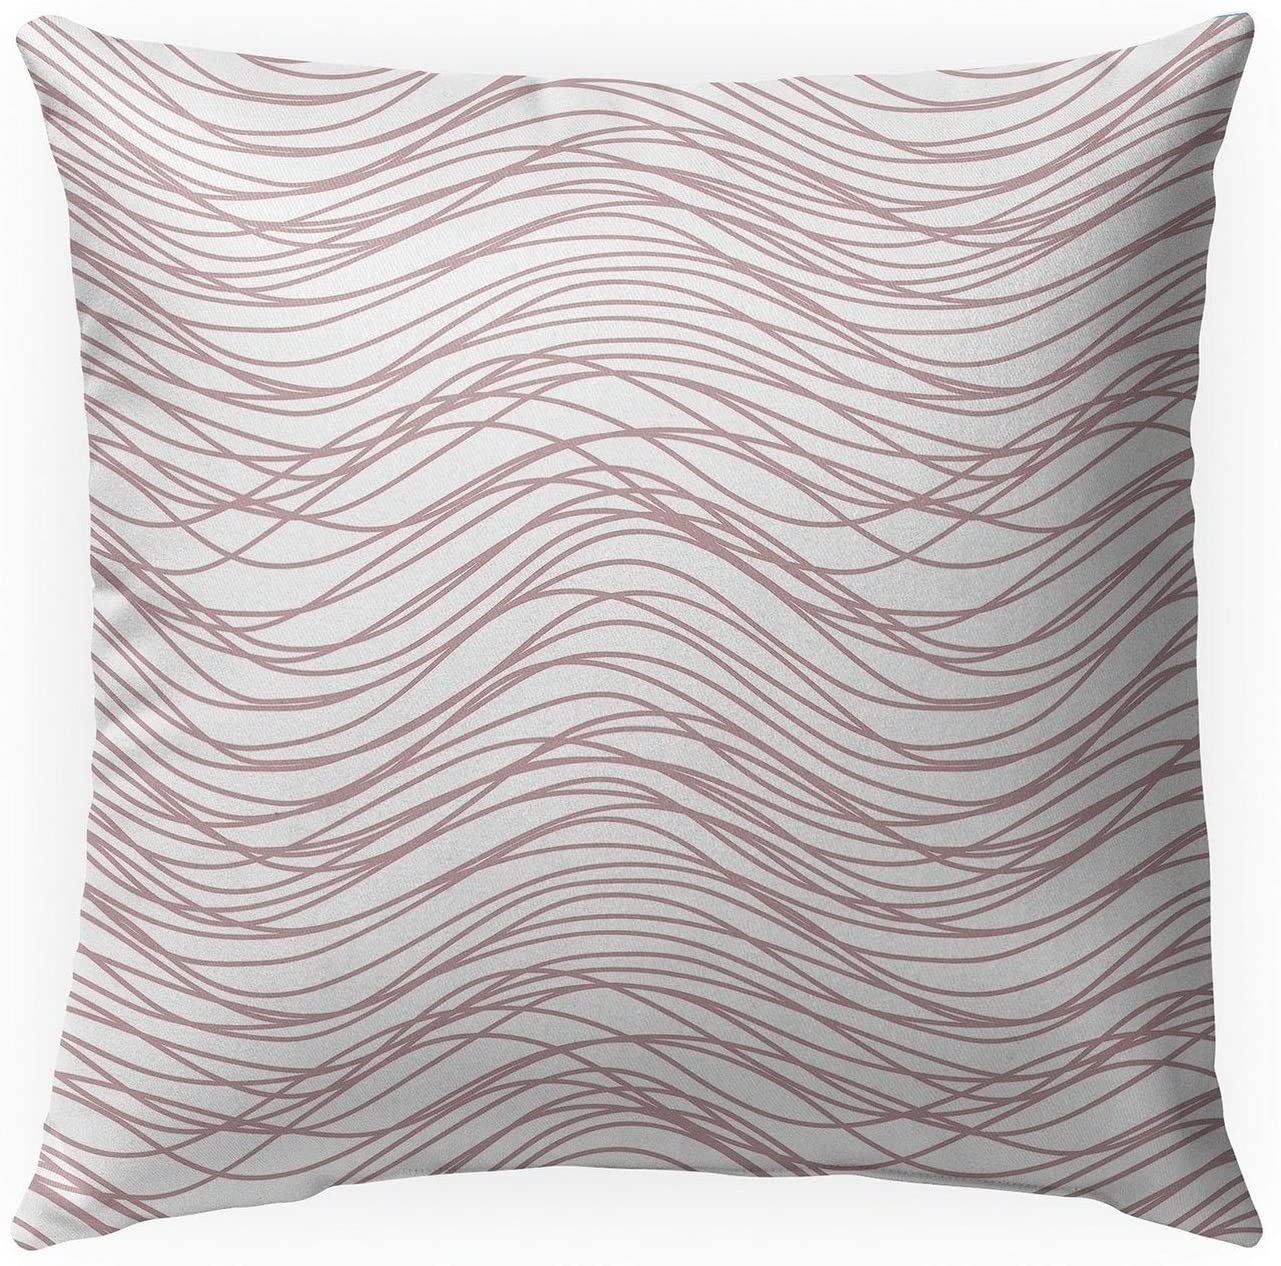 Flow Rose Indoor|Outdoor Pillow by Tiffany 18x18 Pink Geometric Modern Contemporary Polyester Removable Cover